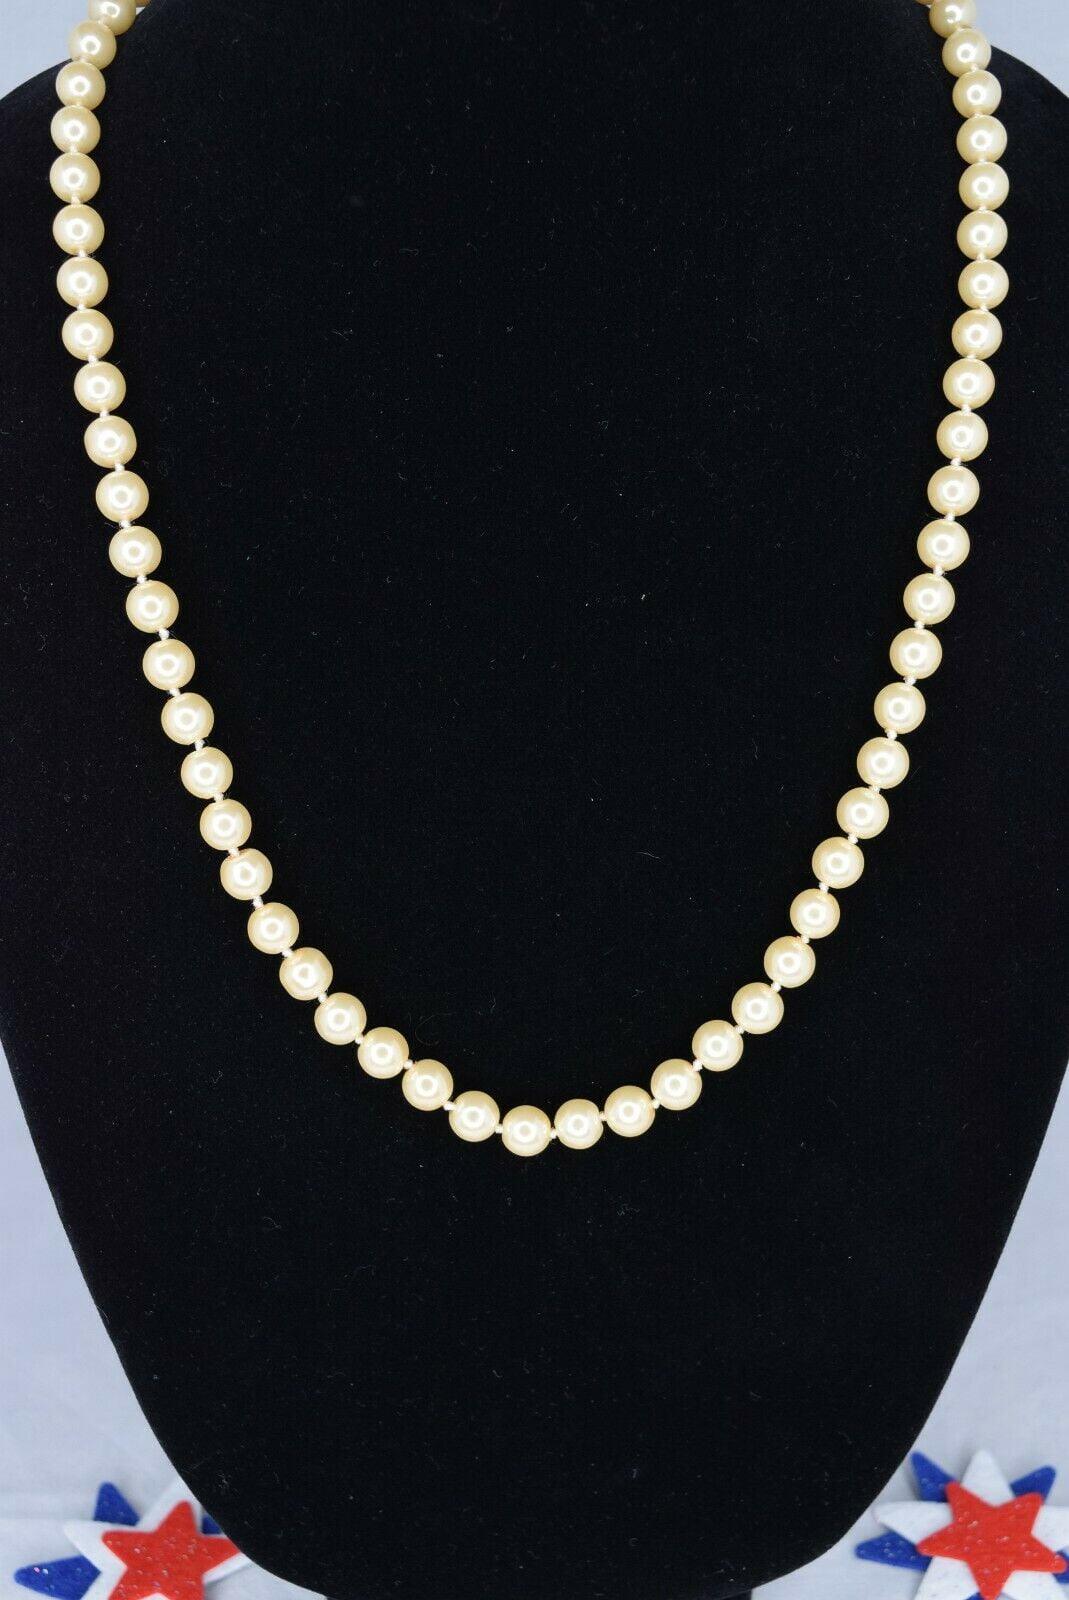 Charter Club | Jewelry | Charter Club Creamtone Luster Faux Pearl Necklace  | Poshmark